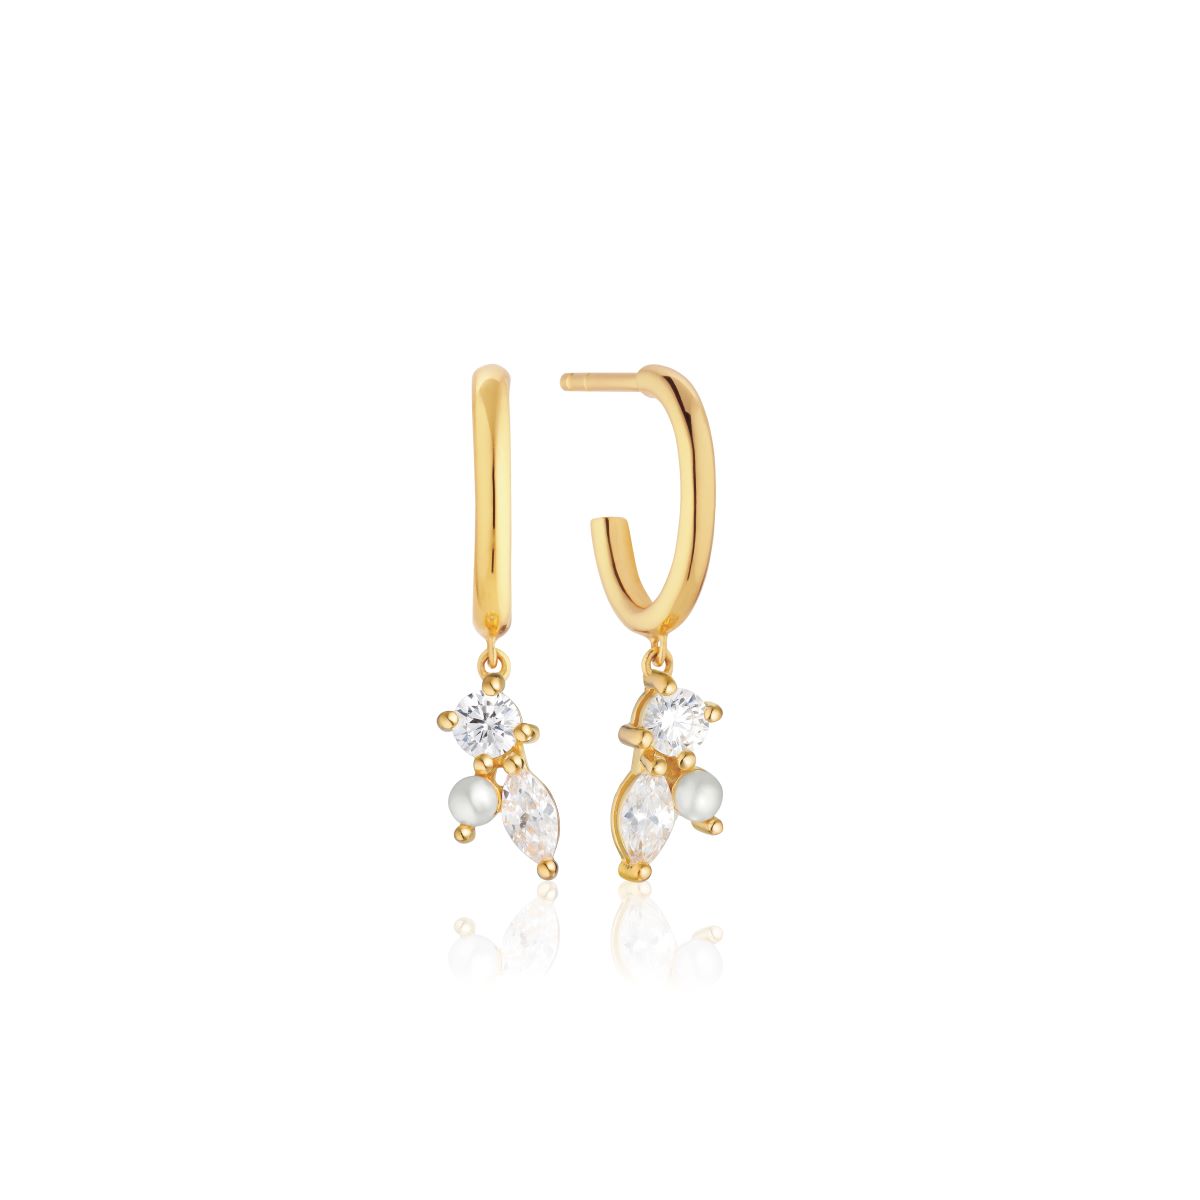 Sif Jakobs Adria Tre Creolo Earrings - Gold with Pearl and White Zirconia